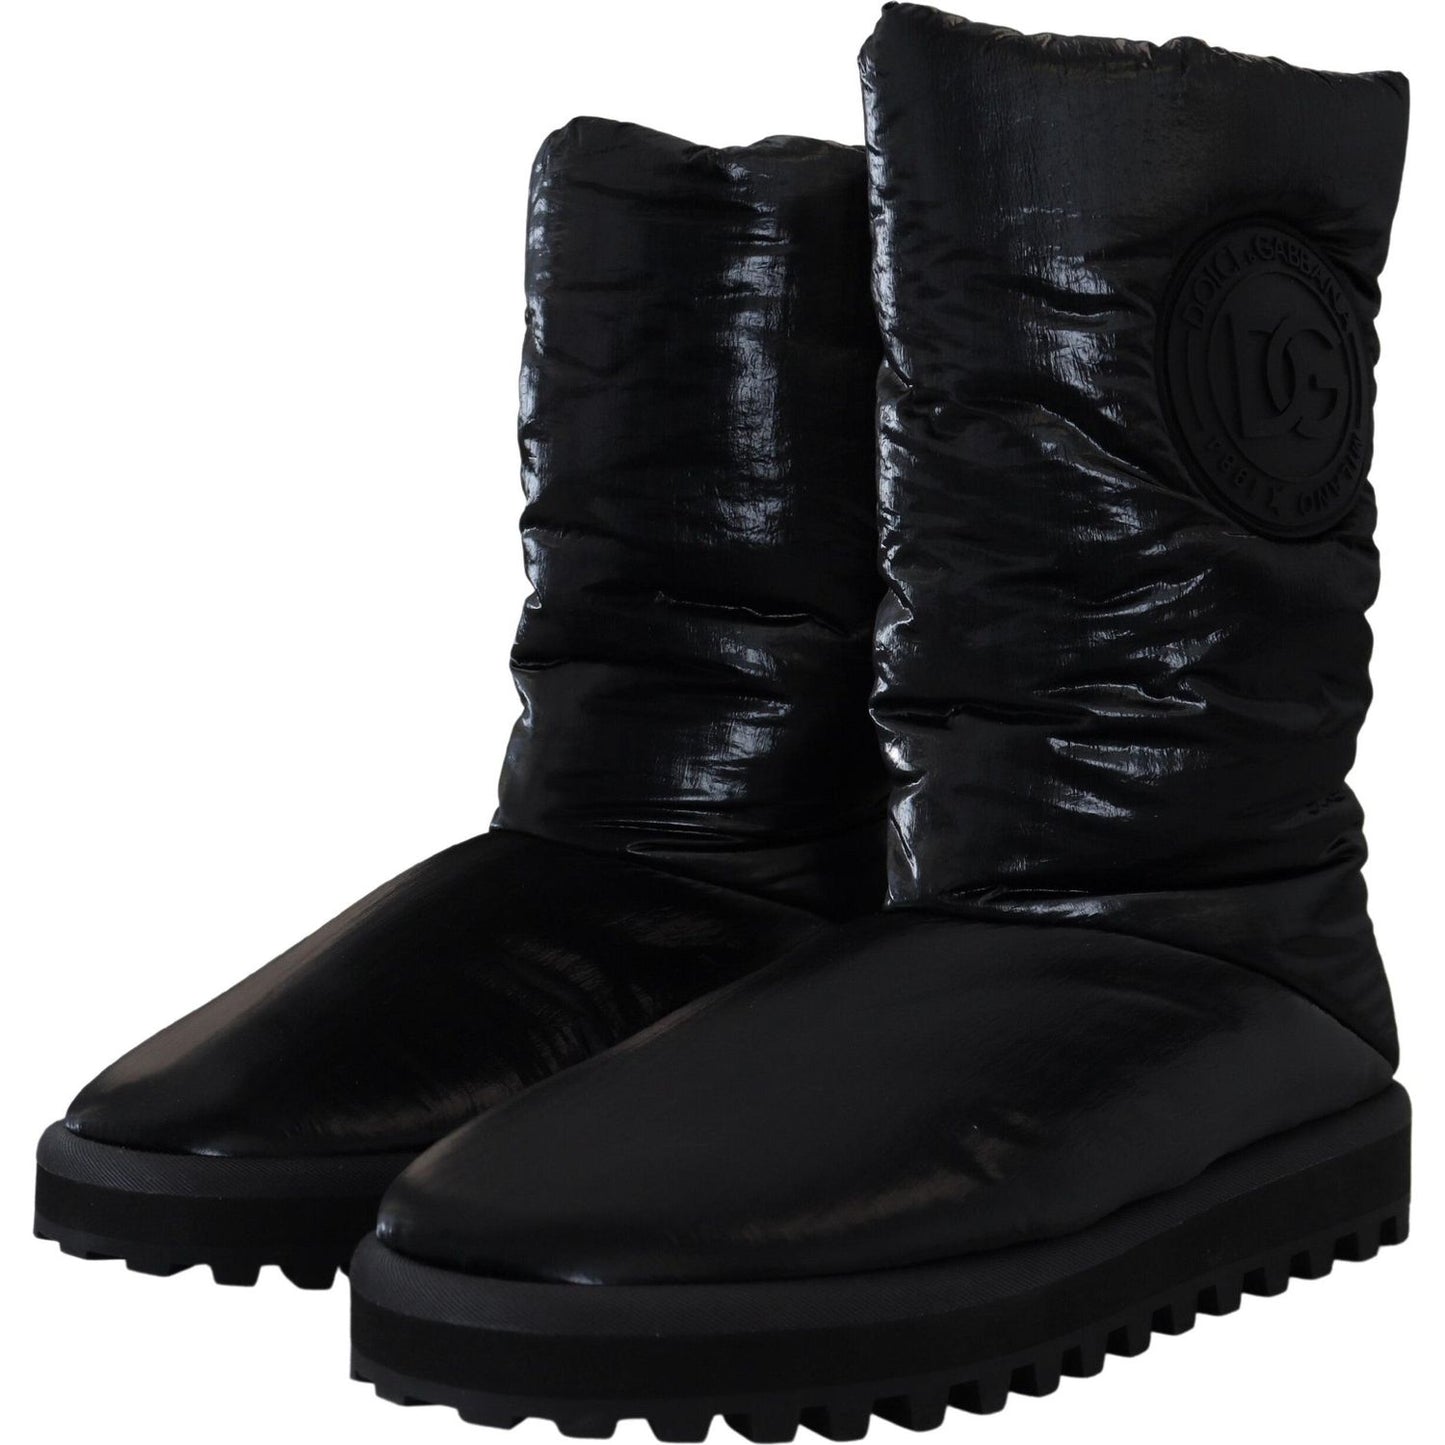 Dolce & Gabbana Elegant Mid-Calf Boots in Black Polyester black-boots-padded-mid-calf-winter-shoes IMG_6172-cdcee174-813.jpg